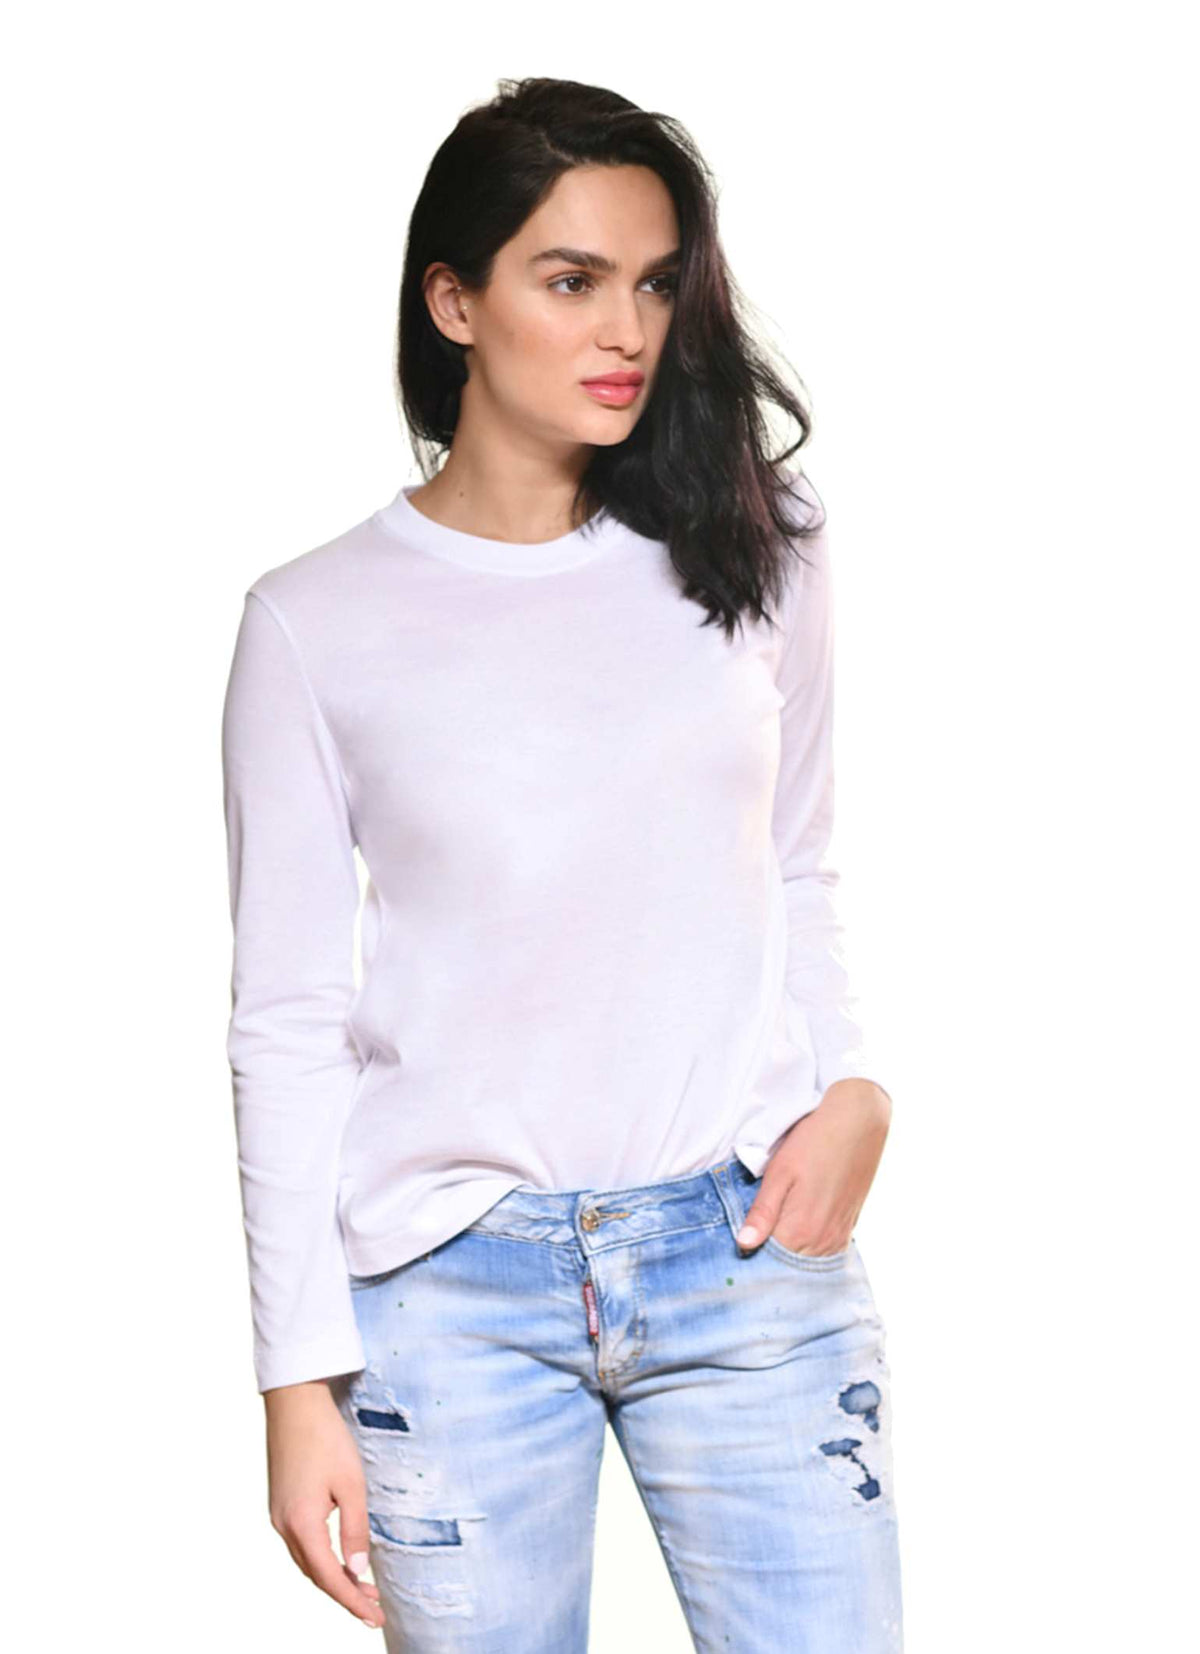 Women wearing Carmen Sol round neck long sleeve tees in color white